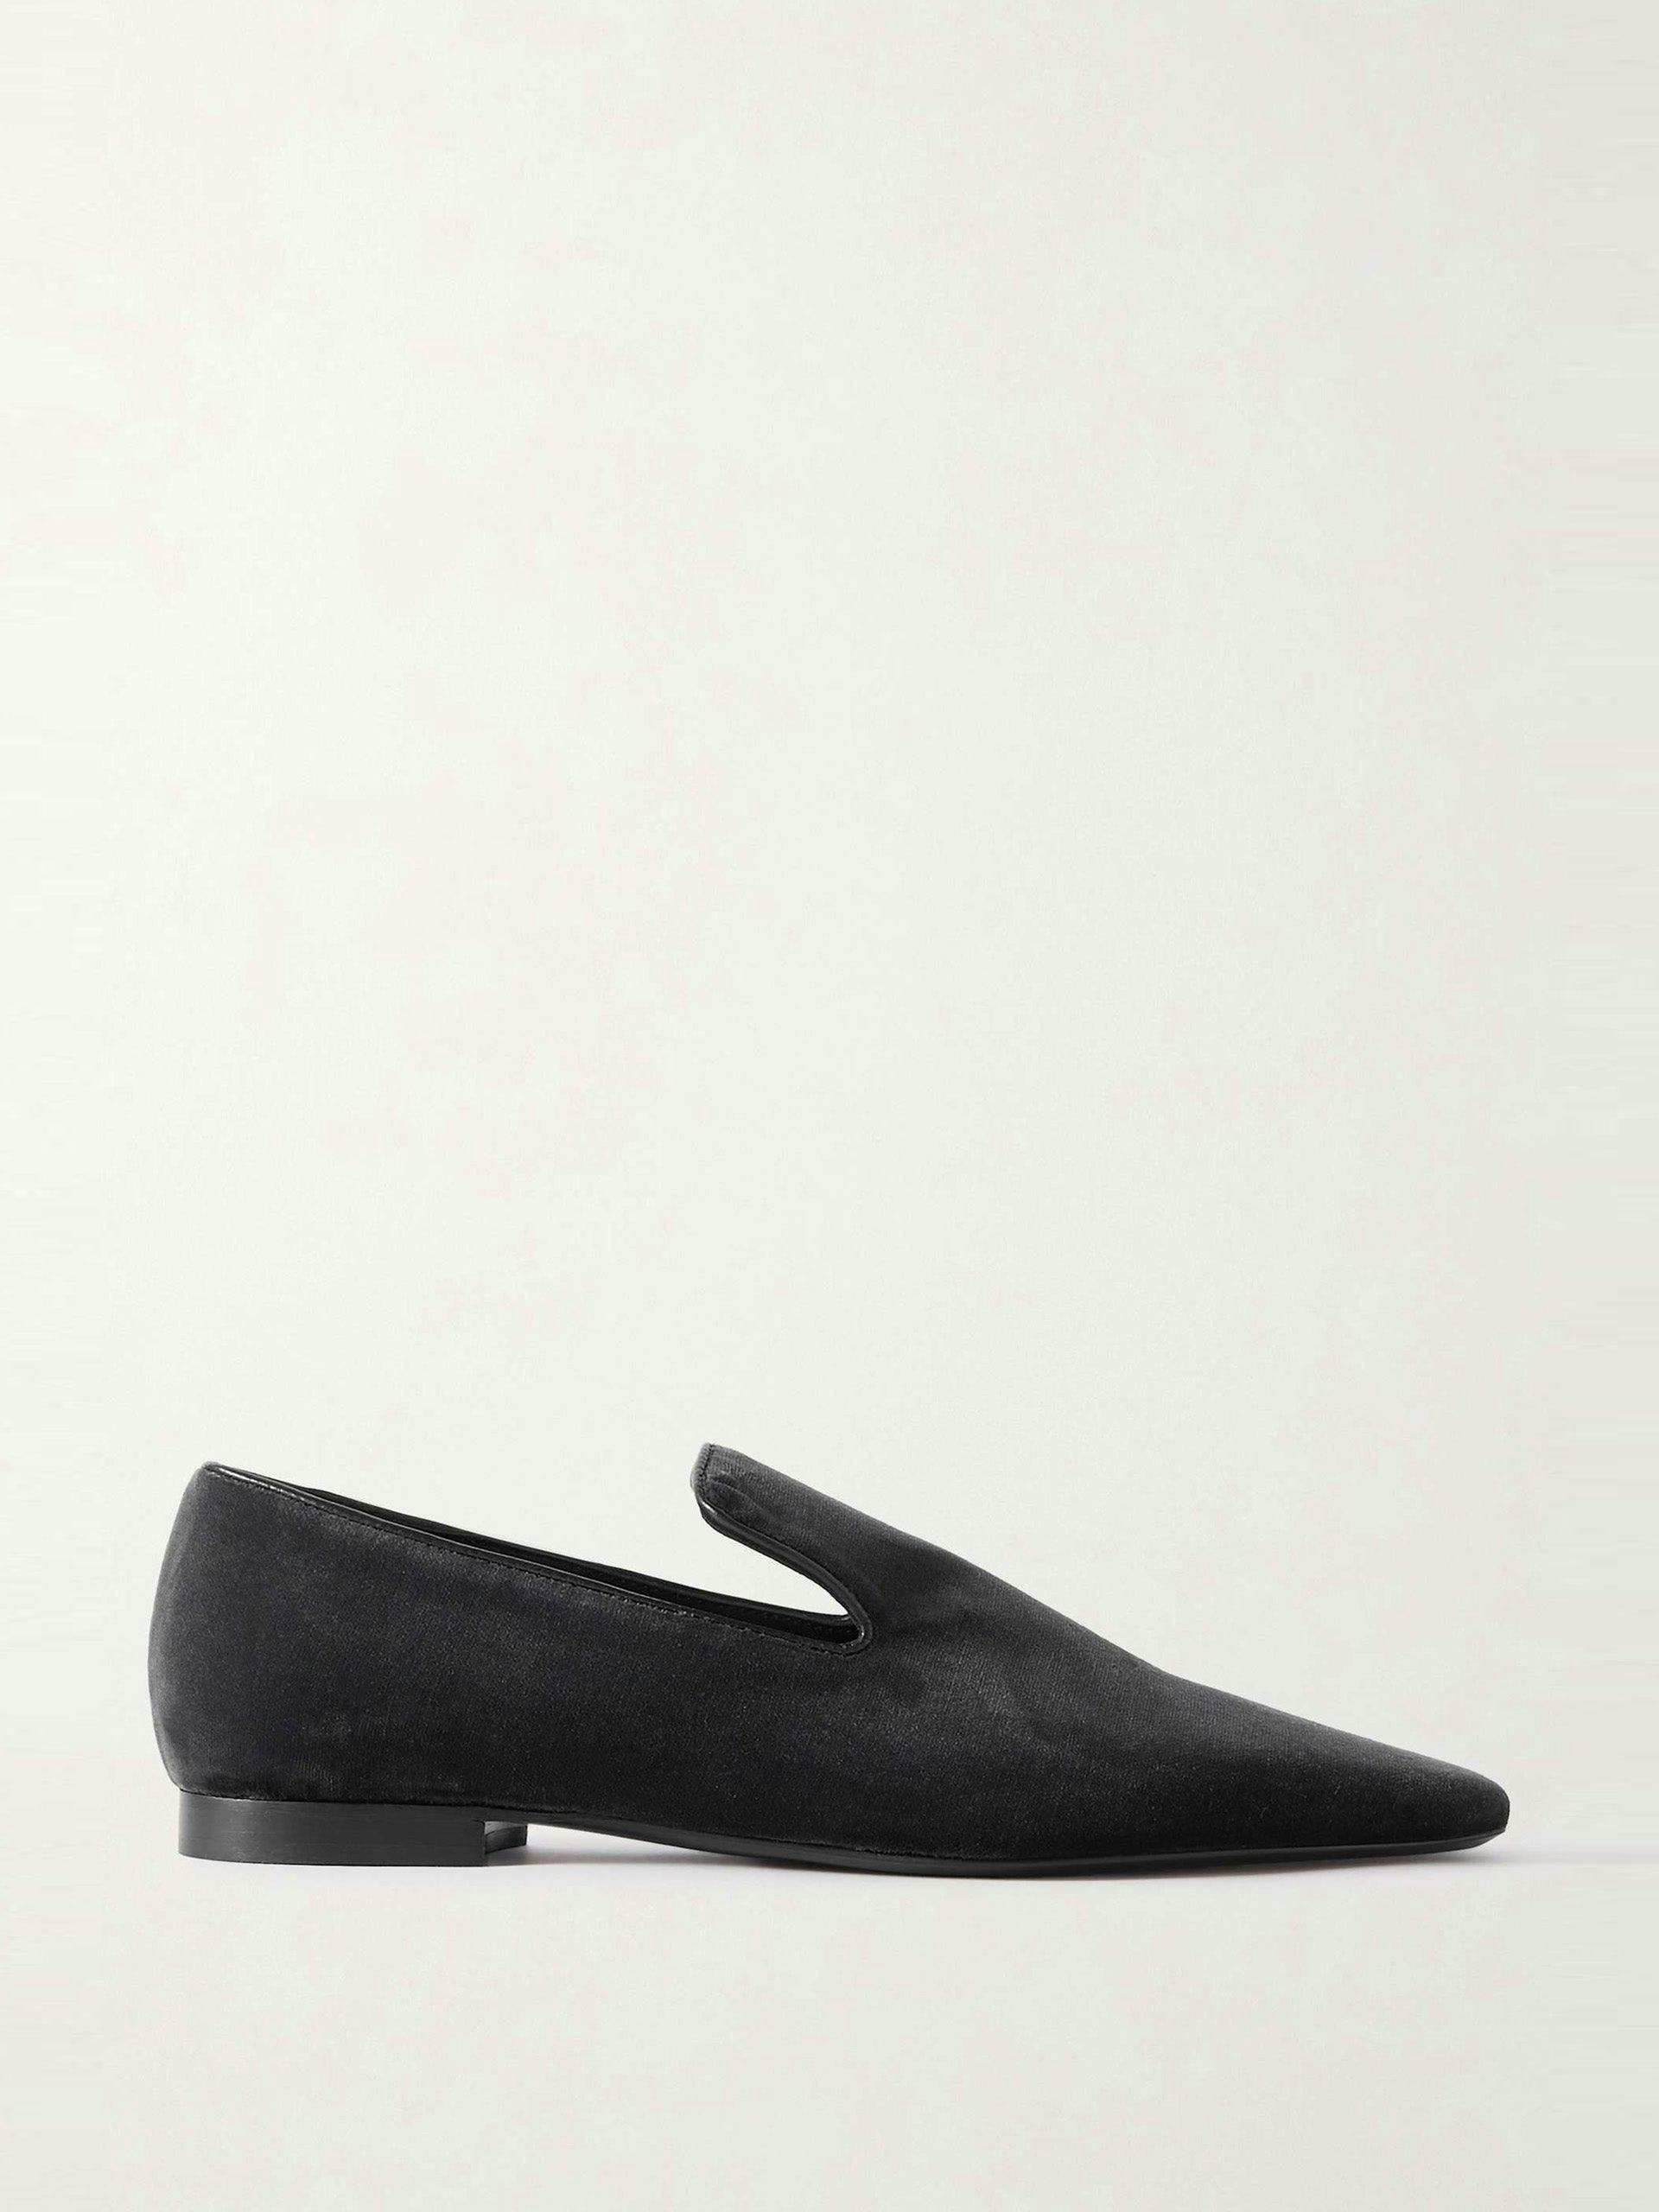 The Venetian suede loafers